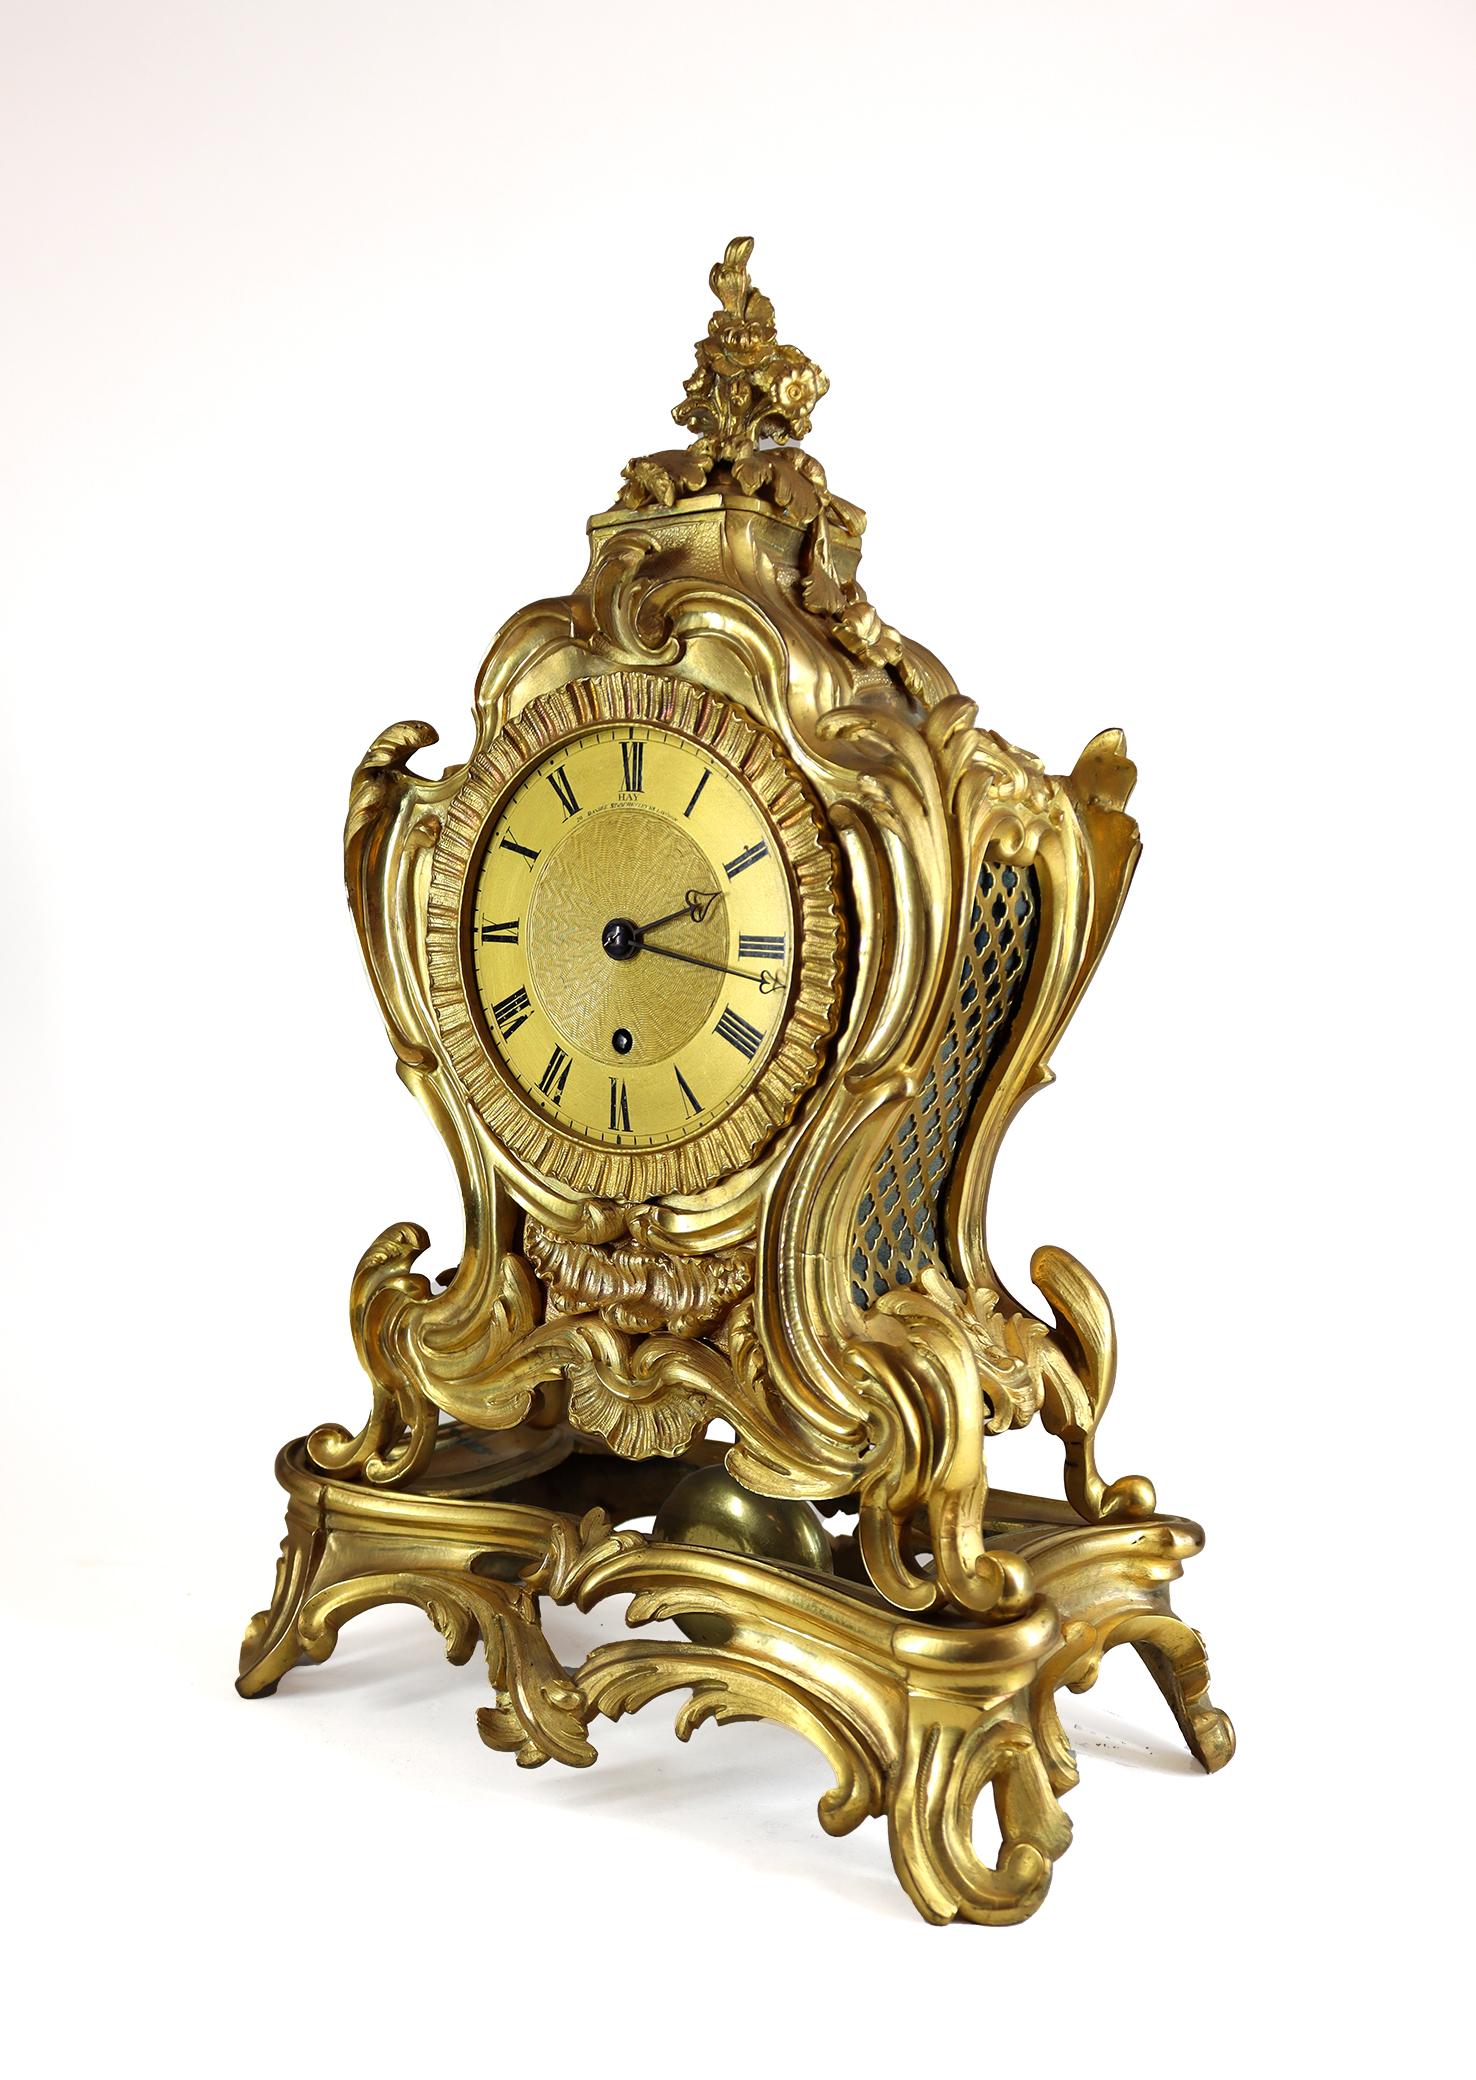 An unusual english single fusee mantel clock in a Louis XV style rocaille ormolu case in the french taste. The eight day fusee movement is of superb quality with a pendulum descending through the bottom of the case and visible though the pierced